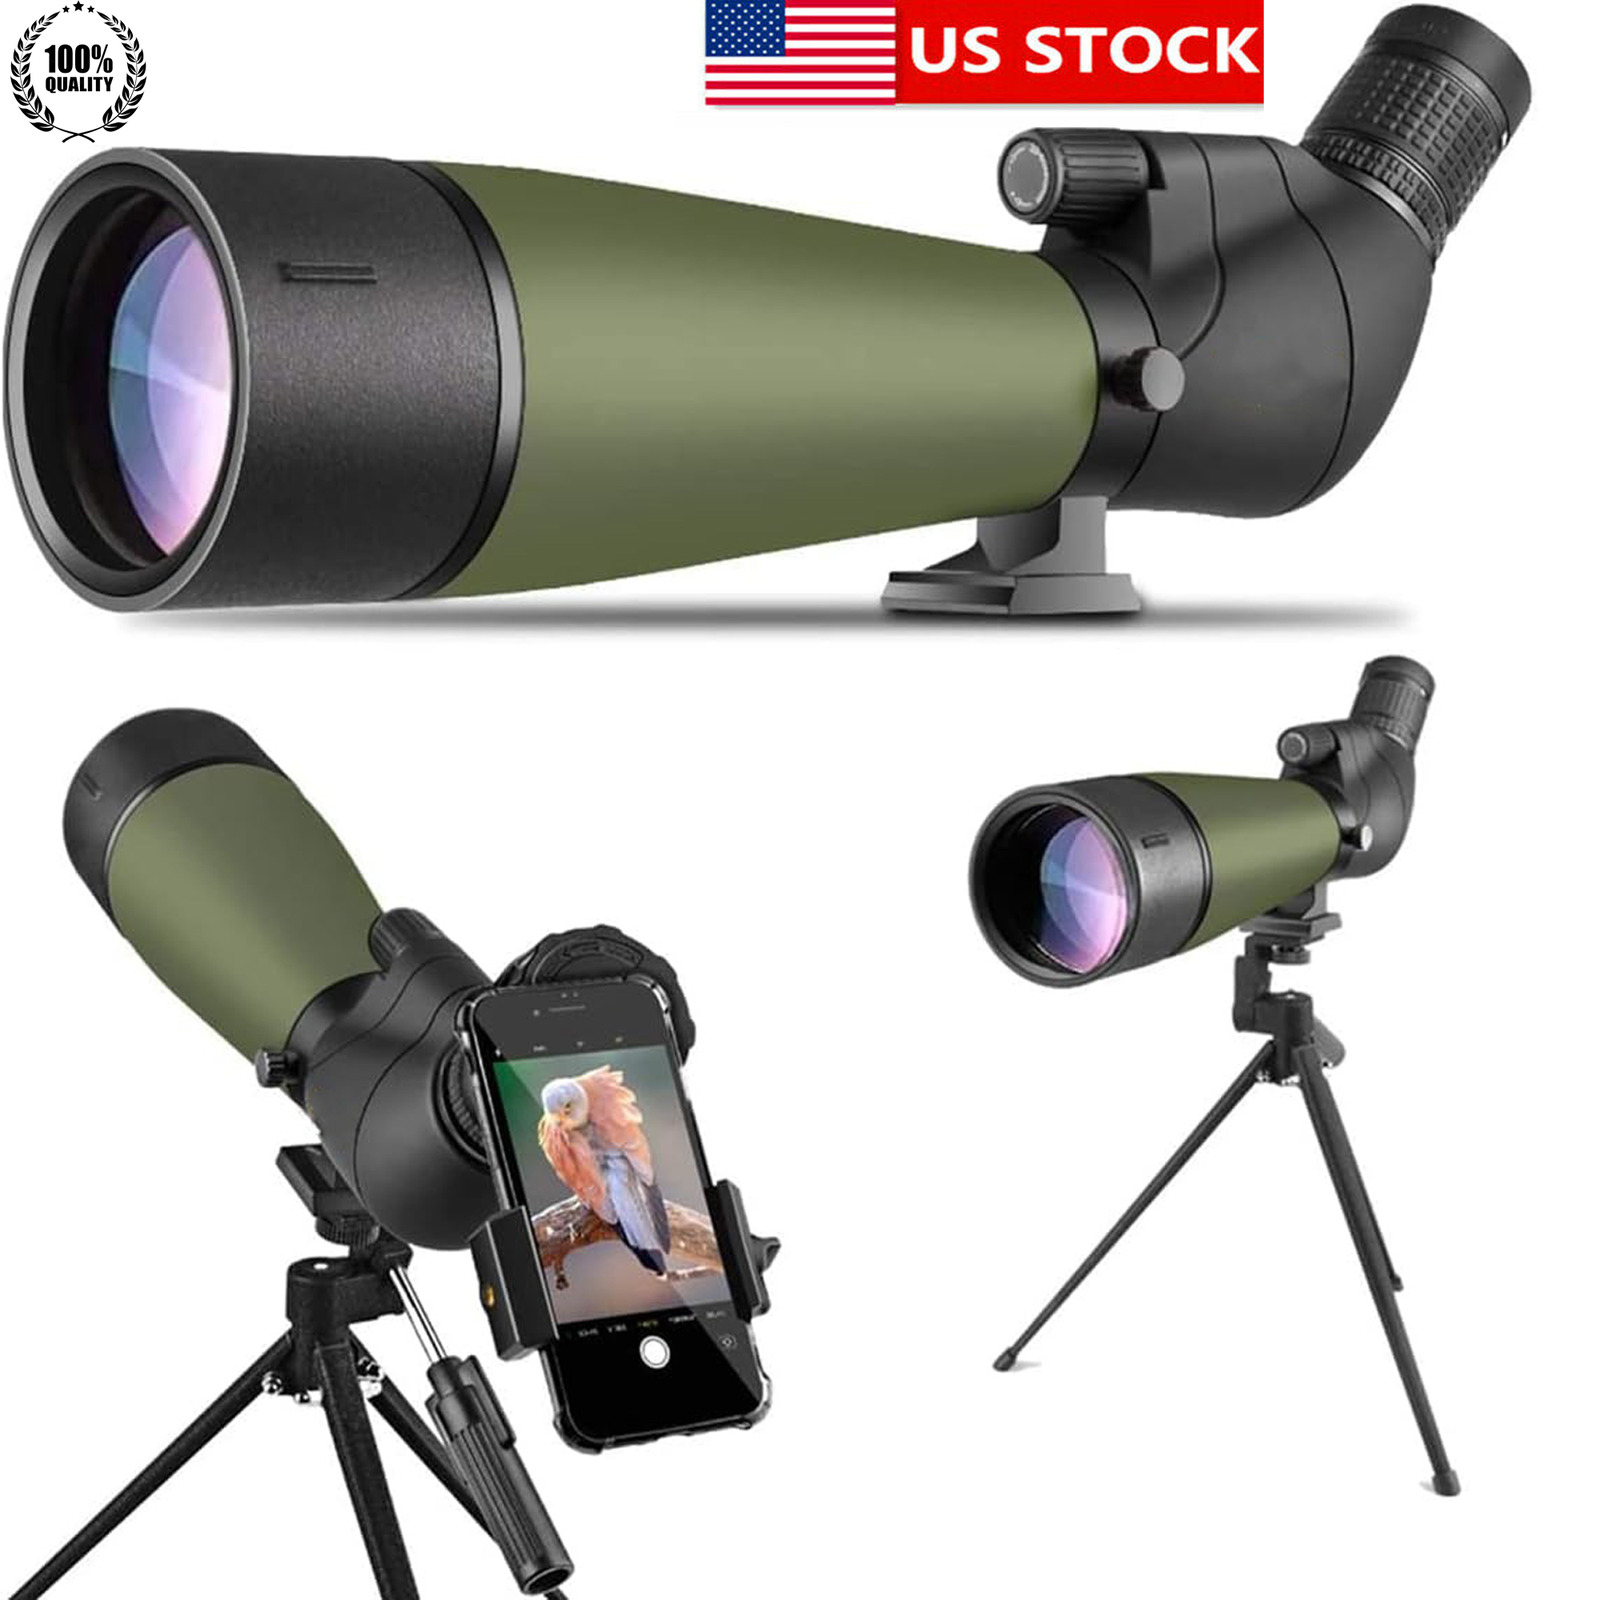 60x80 Spotted Telescope with Tripod, Handbag, and Quick Phone Stand